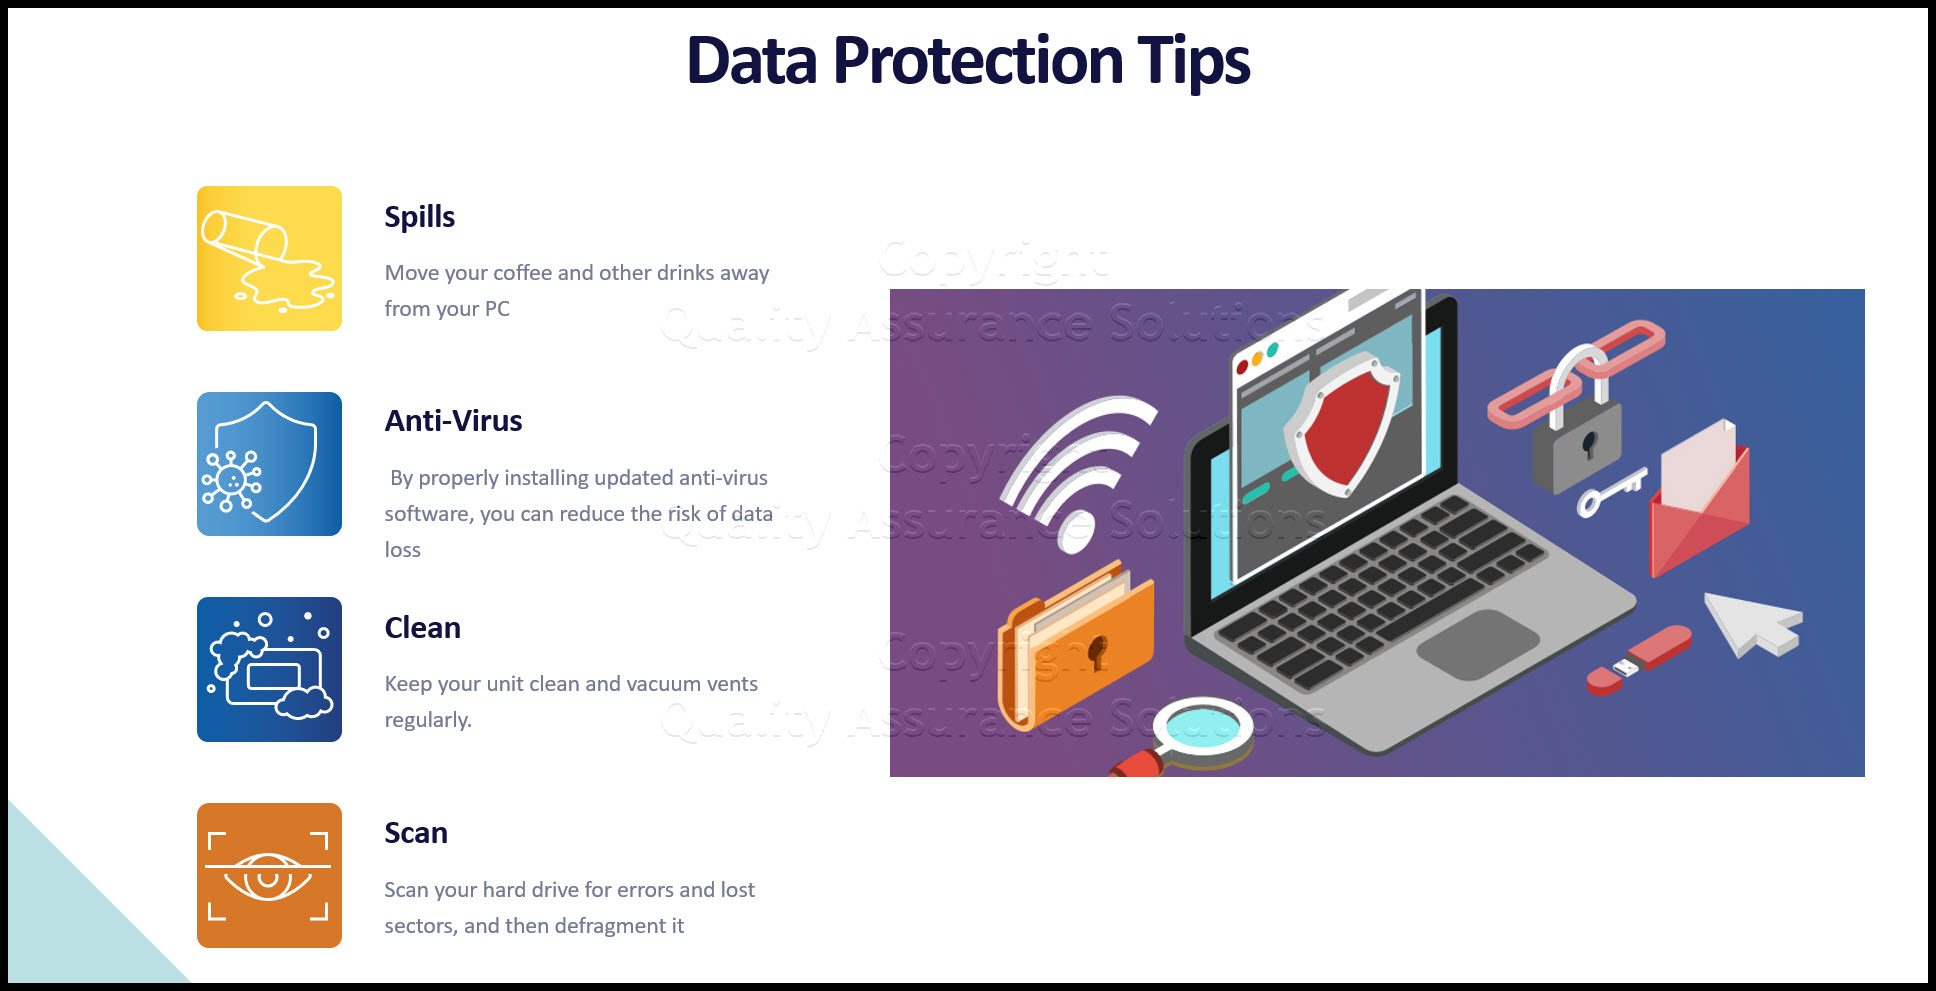 Data protection tips for your company. This article covers important issues for business data protection and data recovery